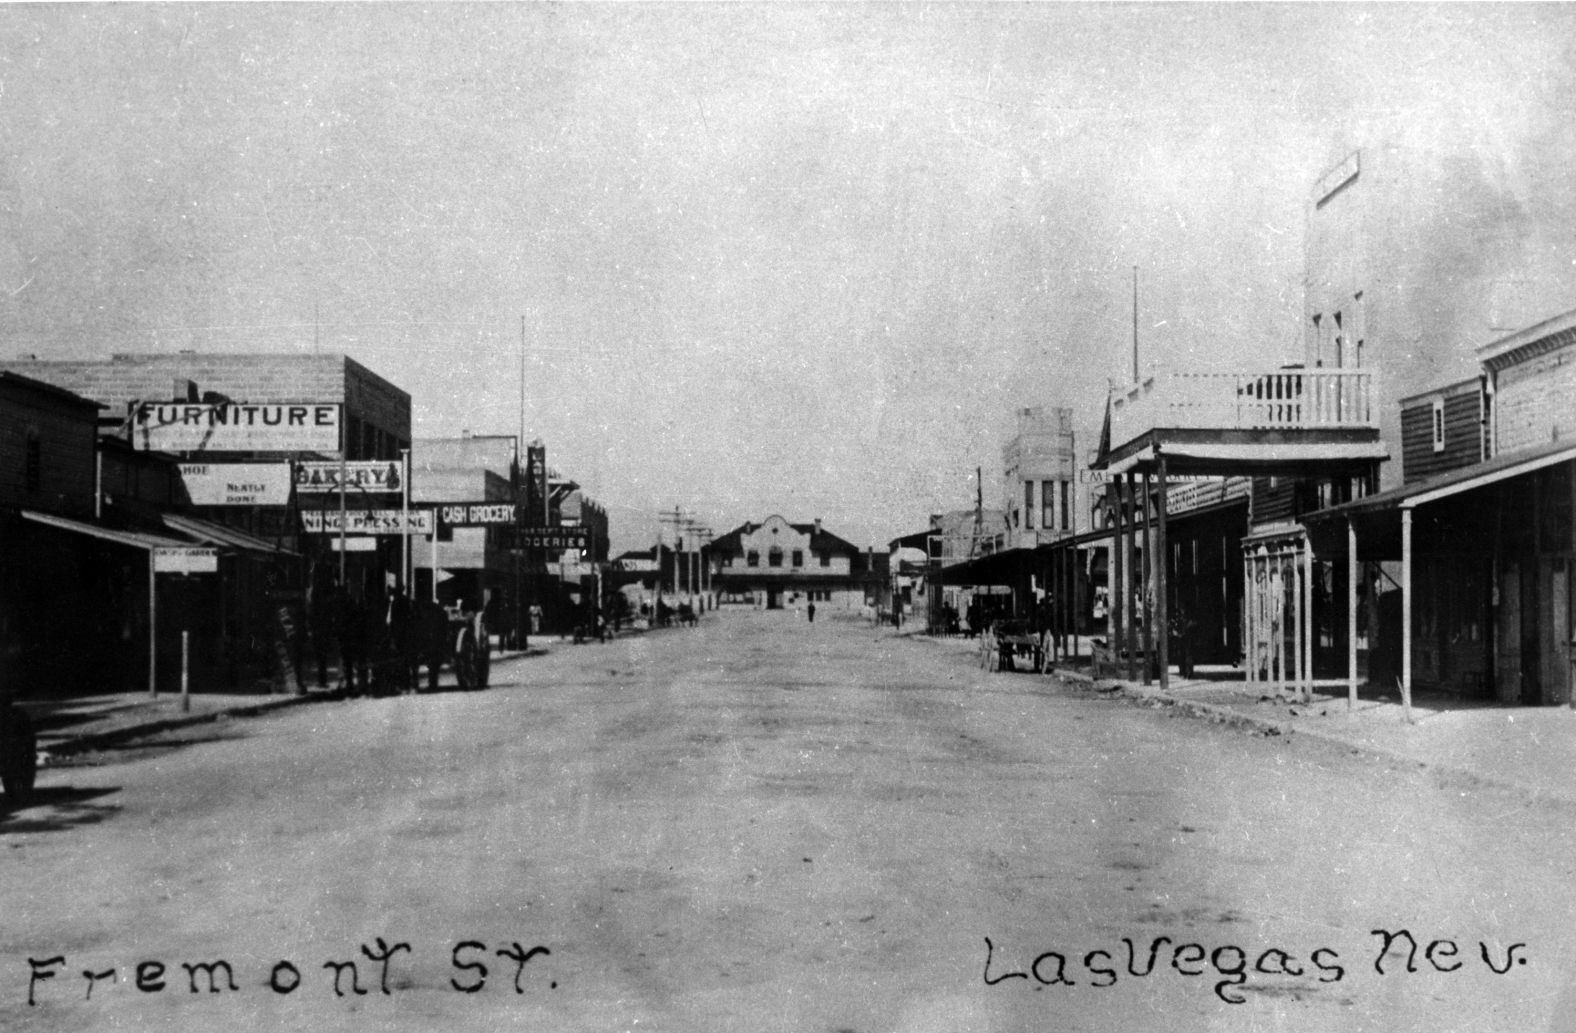 A view of Las Vegas' Fremont Street at the beginning of the 20th century. The desert city, founded in 1905, would eventually transform into one of the entertainment capitals of the world.